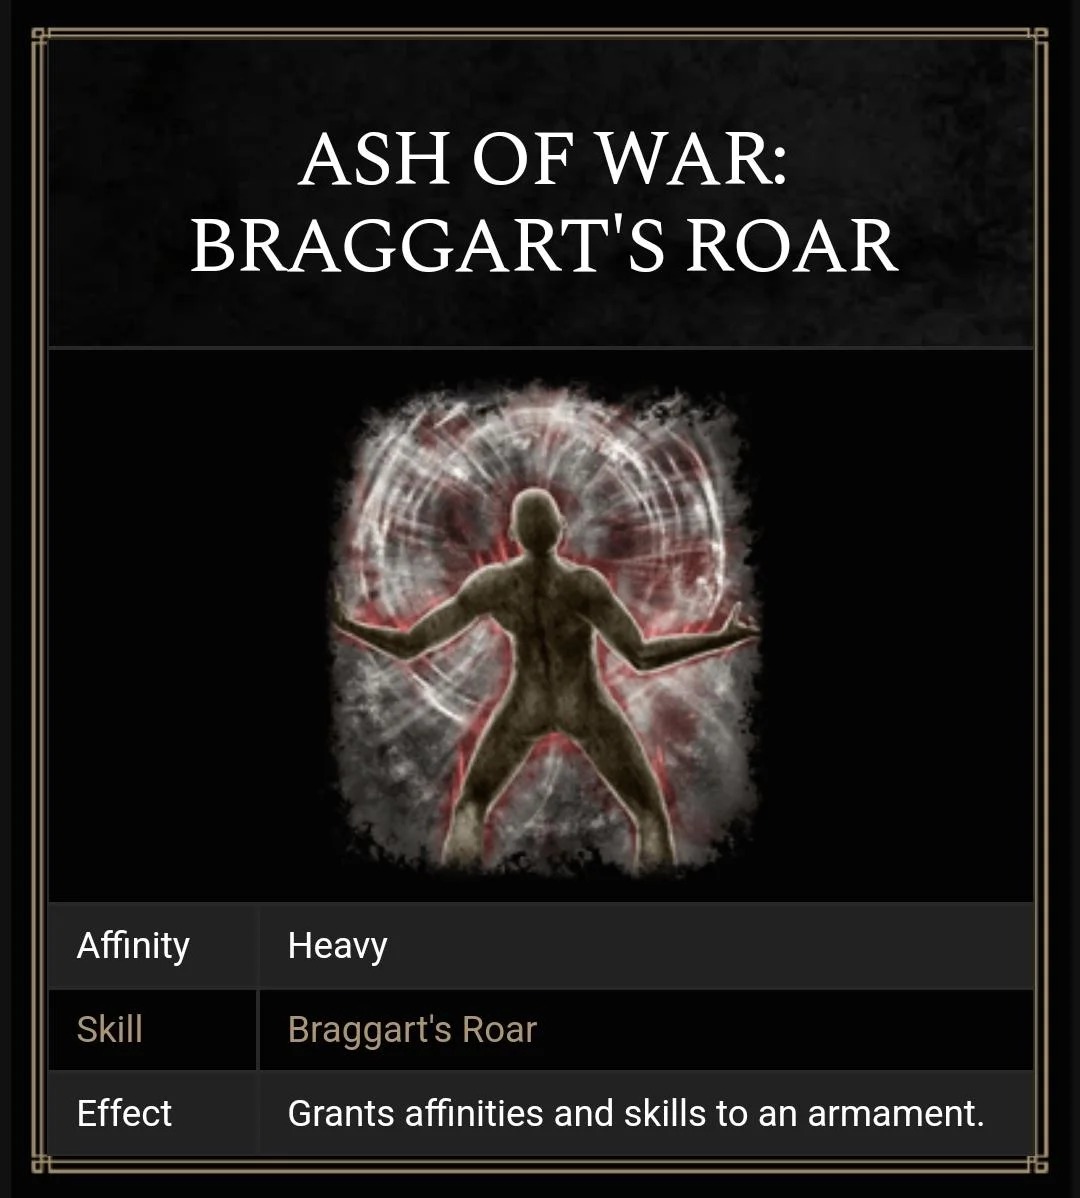 Best Ashes of War for Strength Builds in Elden Ring